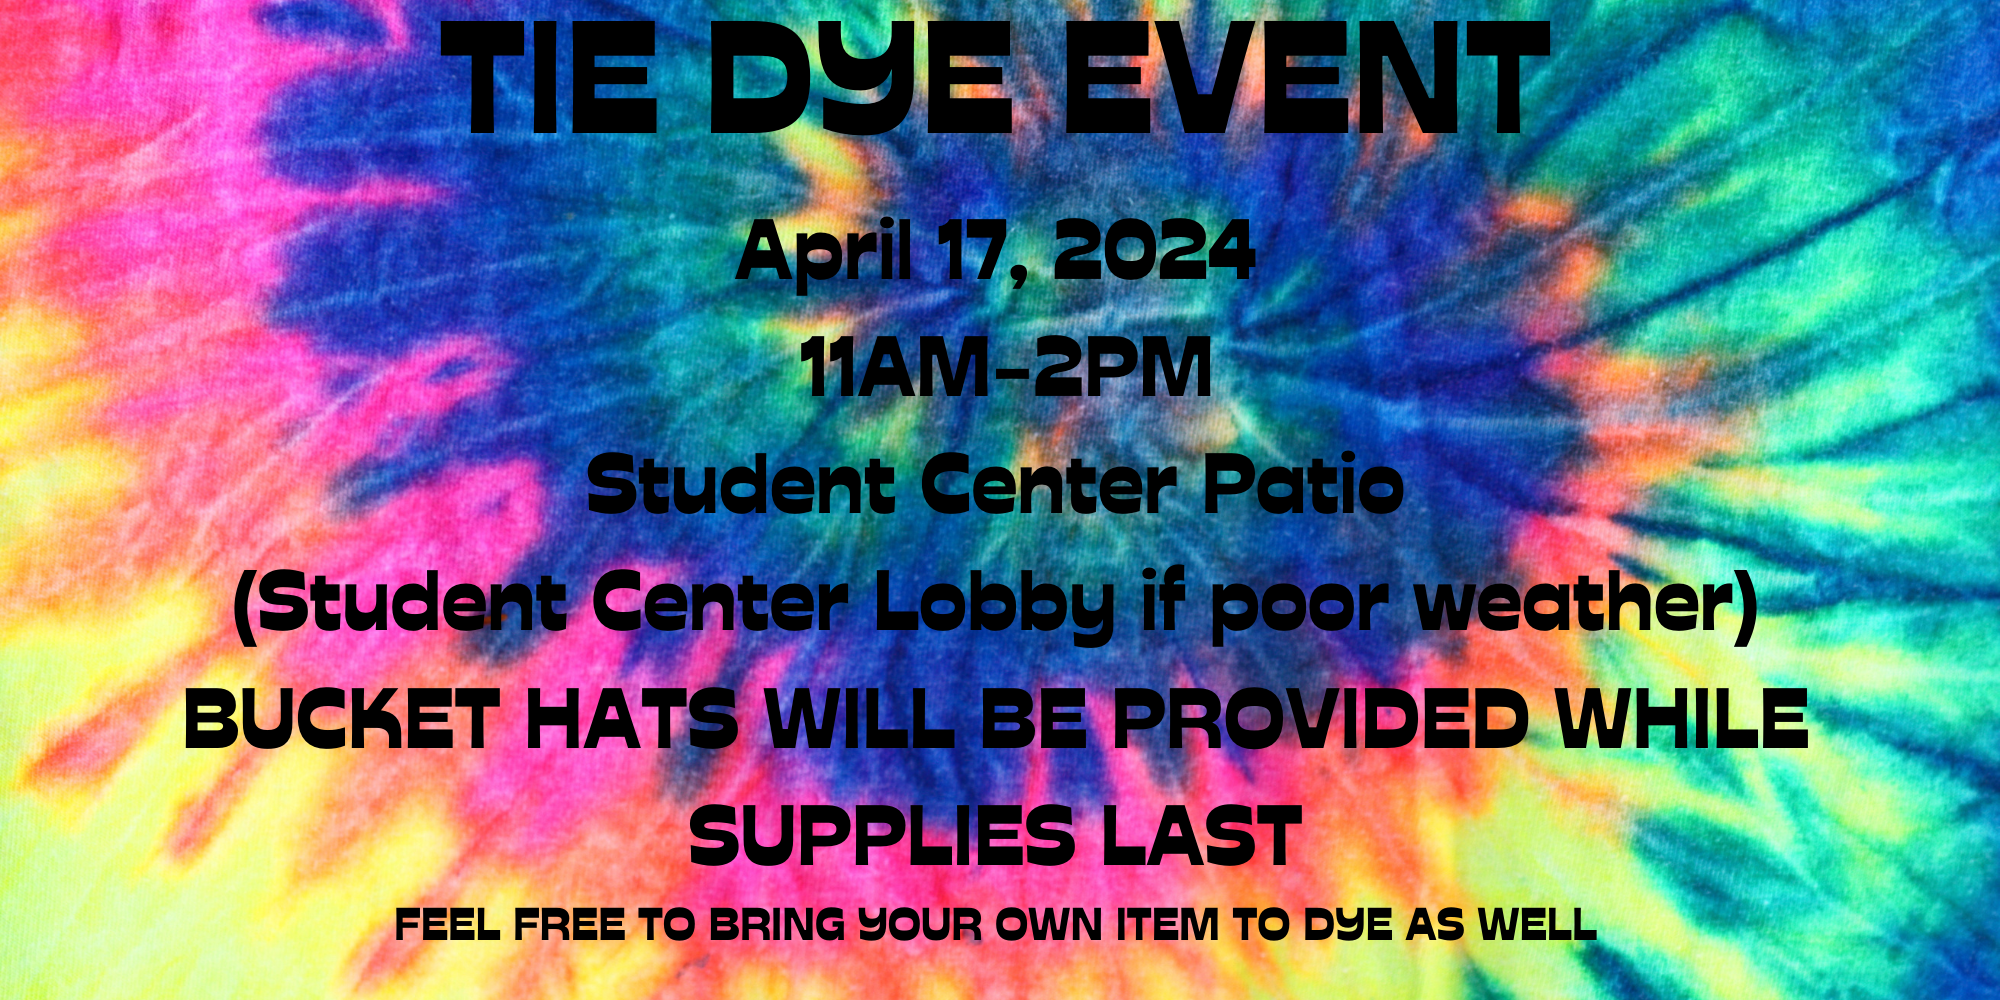 Tie Dye Event April 17, 2024 11am-gone Bucket Hats will be provided while supplies last Student Center Patio